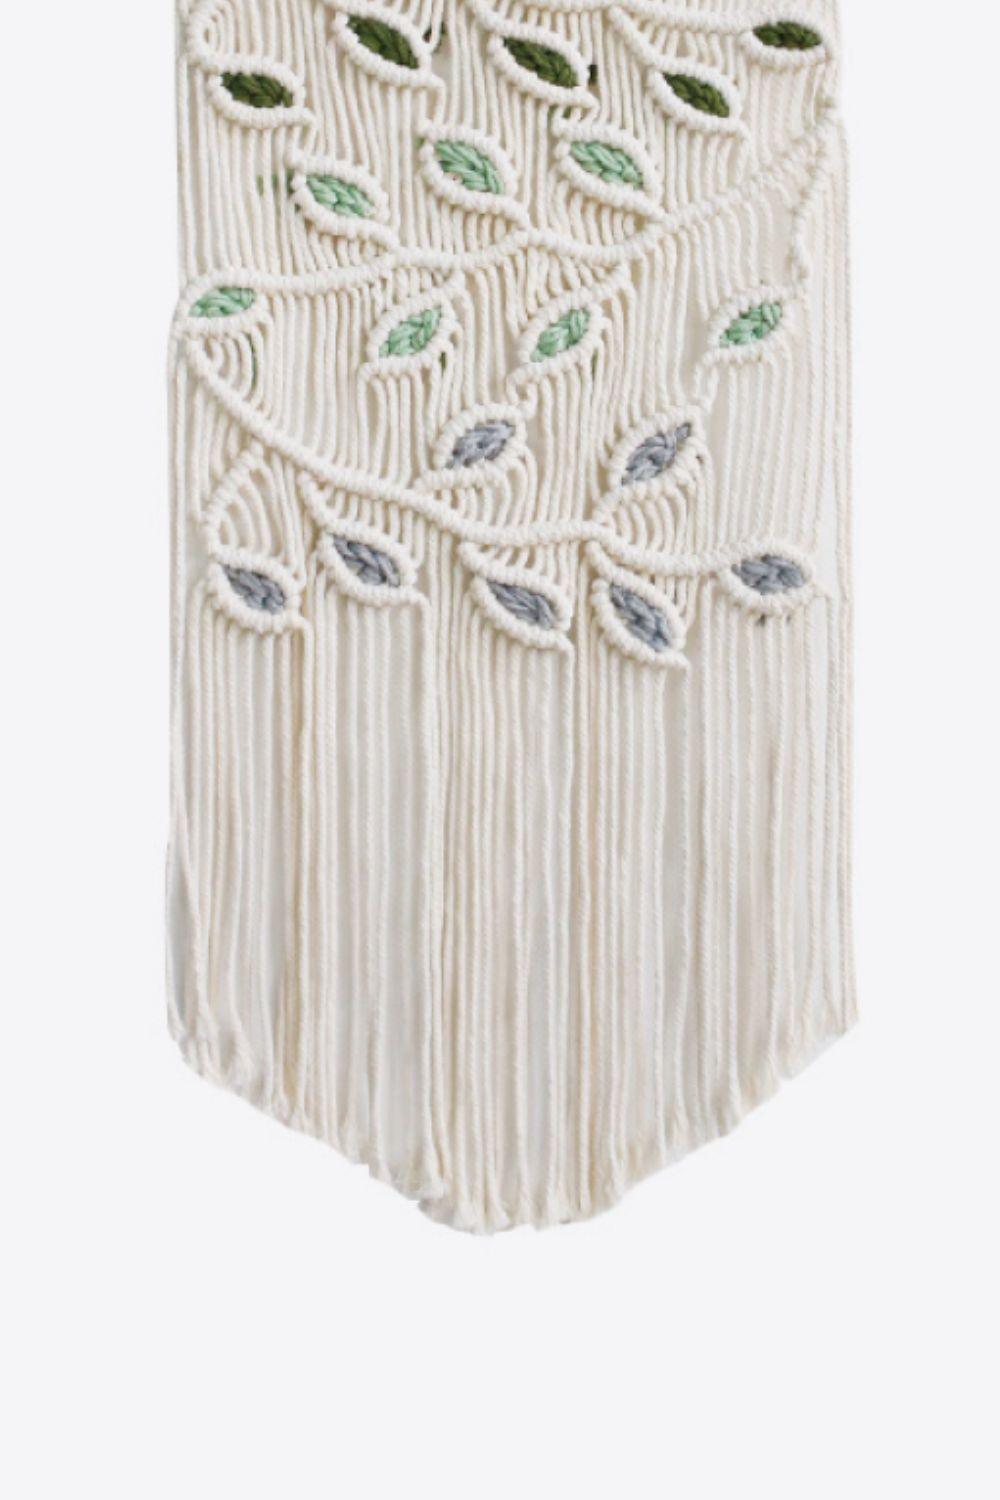 Contrast Leaf Fringe Macrame Wall Hanging - Crazy Like a Daisy Boutique #